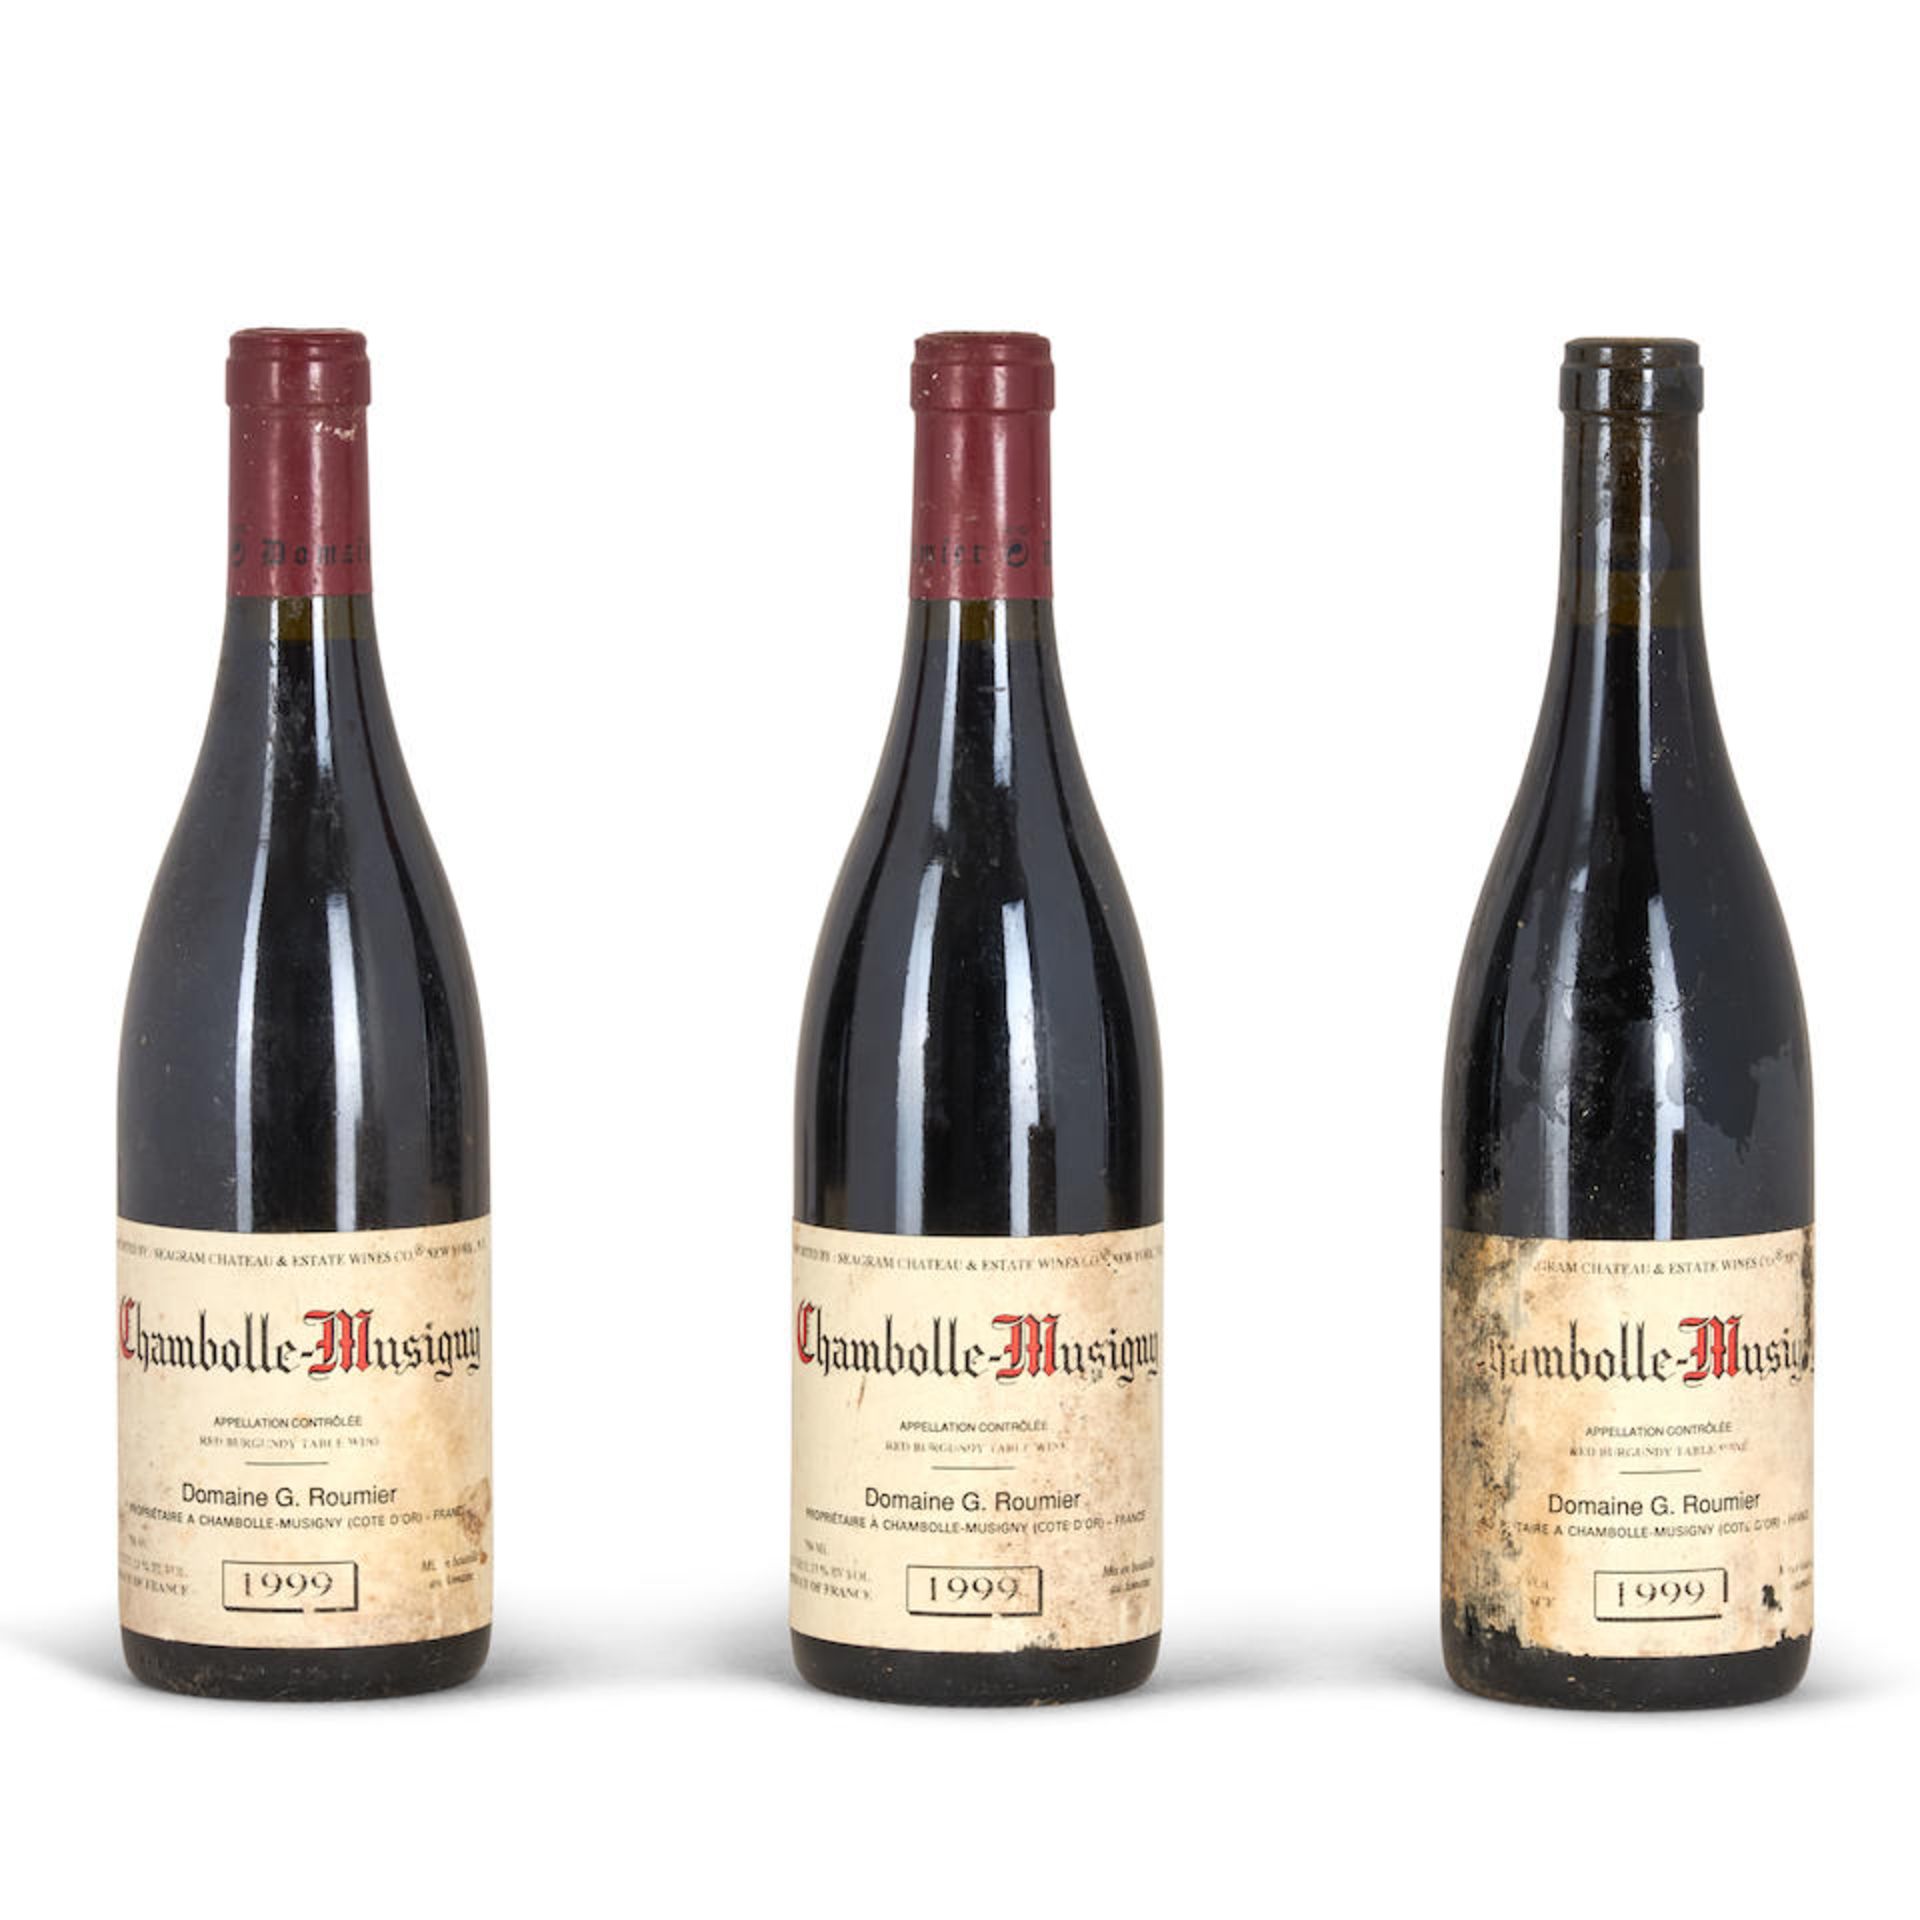 G. Roumier Chambolle Musigny 1999 (3 bottles)